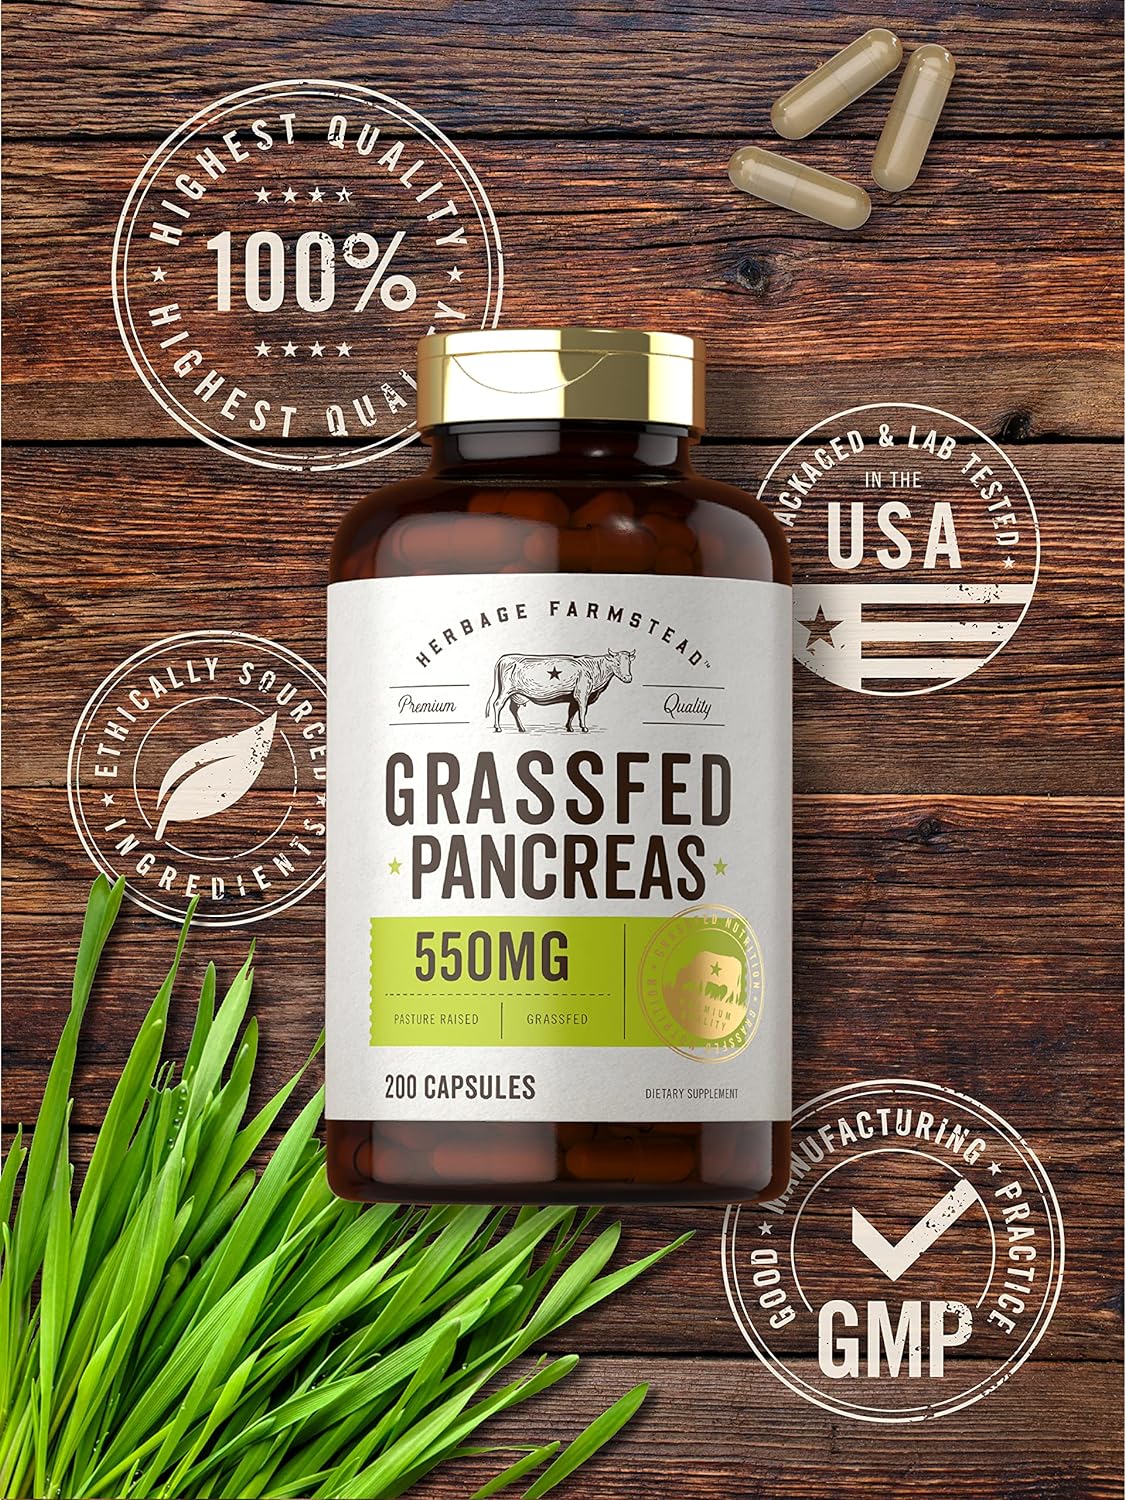 Carlyle Grass Fed Beef Pancreas | 550mg | 200 Capsules | Desiccated Pasture Raised Bovine Supplement | Non-GMO, Gluten Free | by Herbage Farmstead : Health & Household